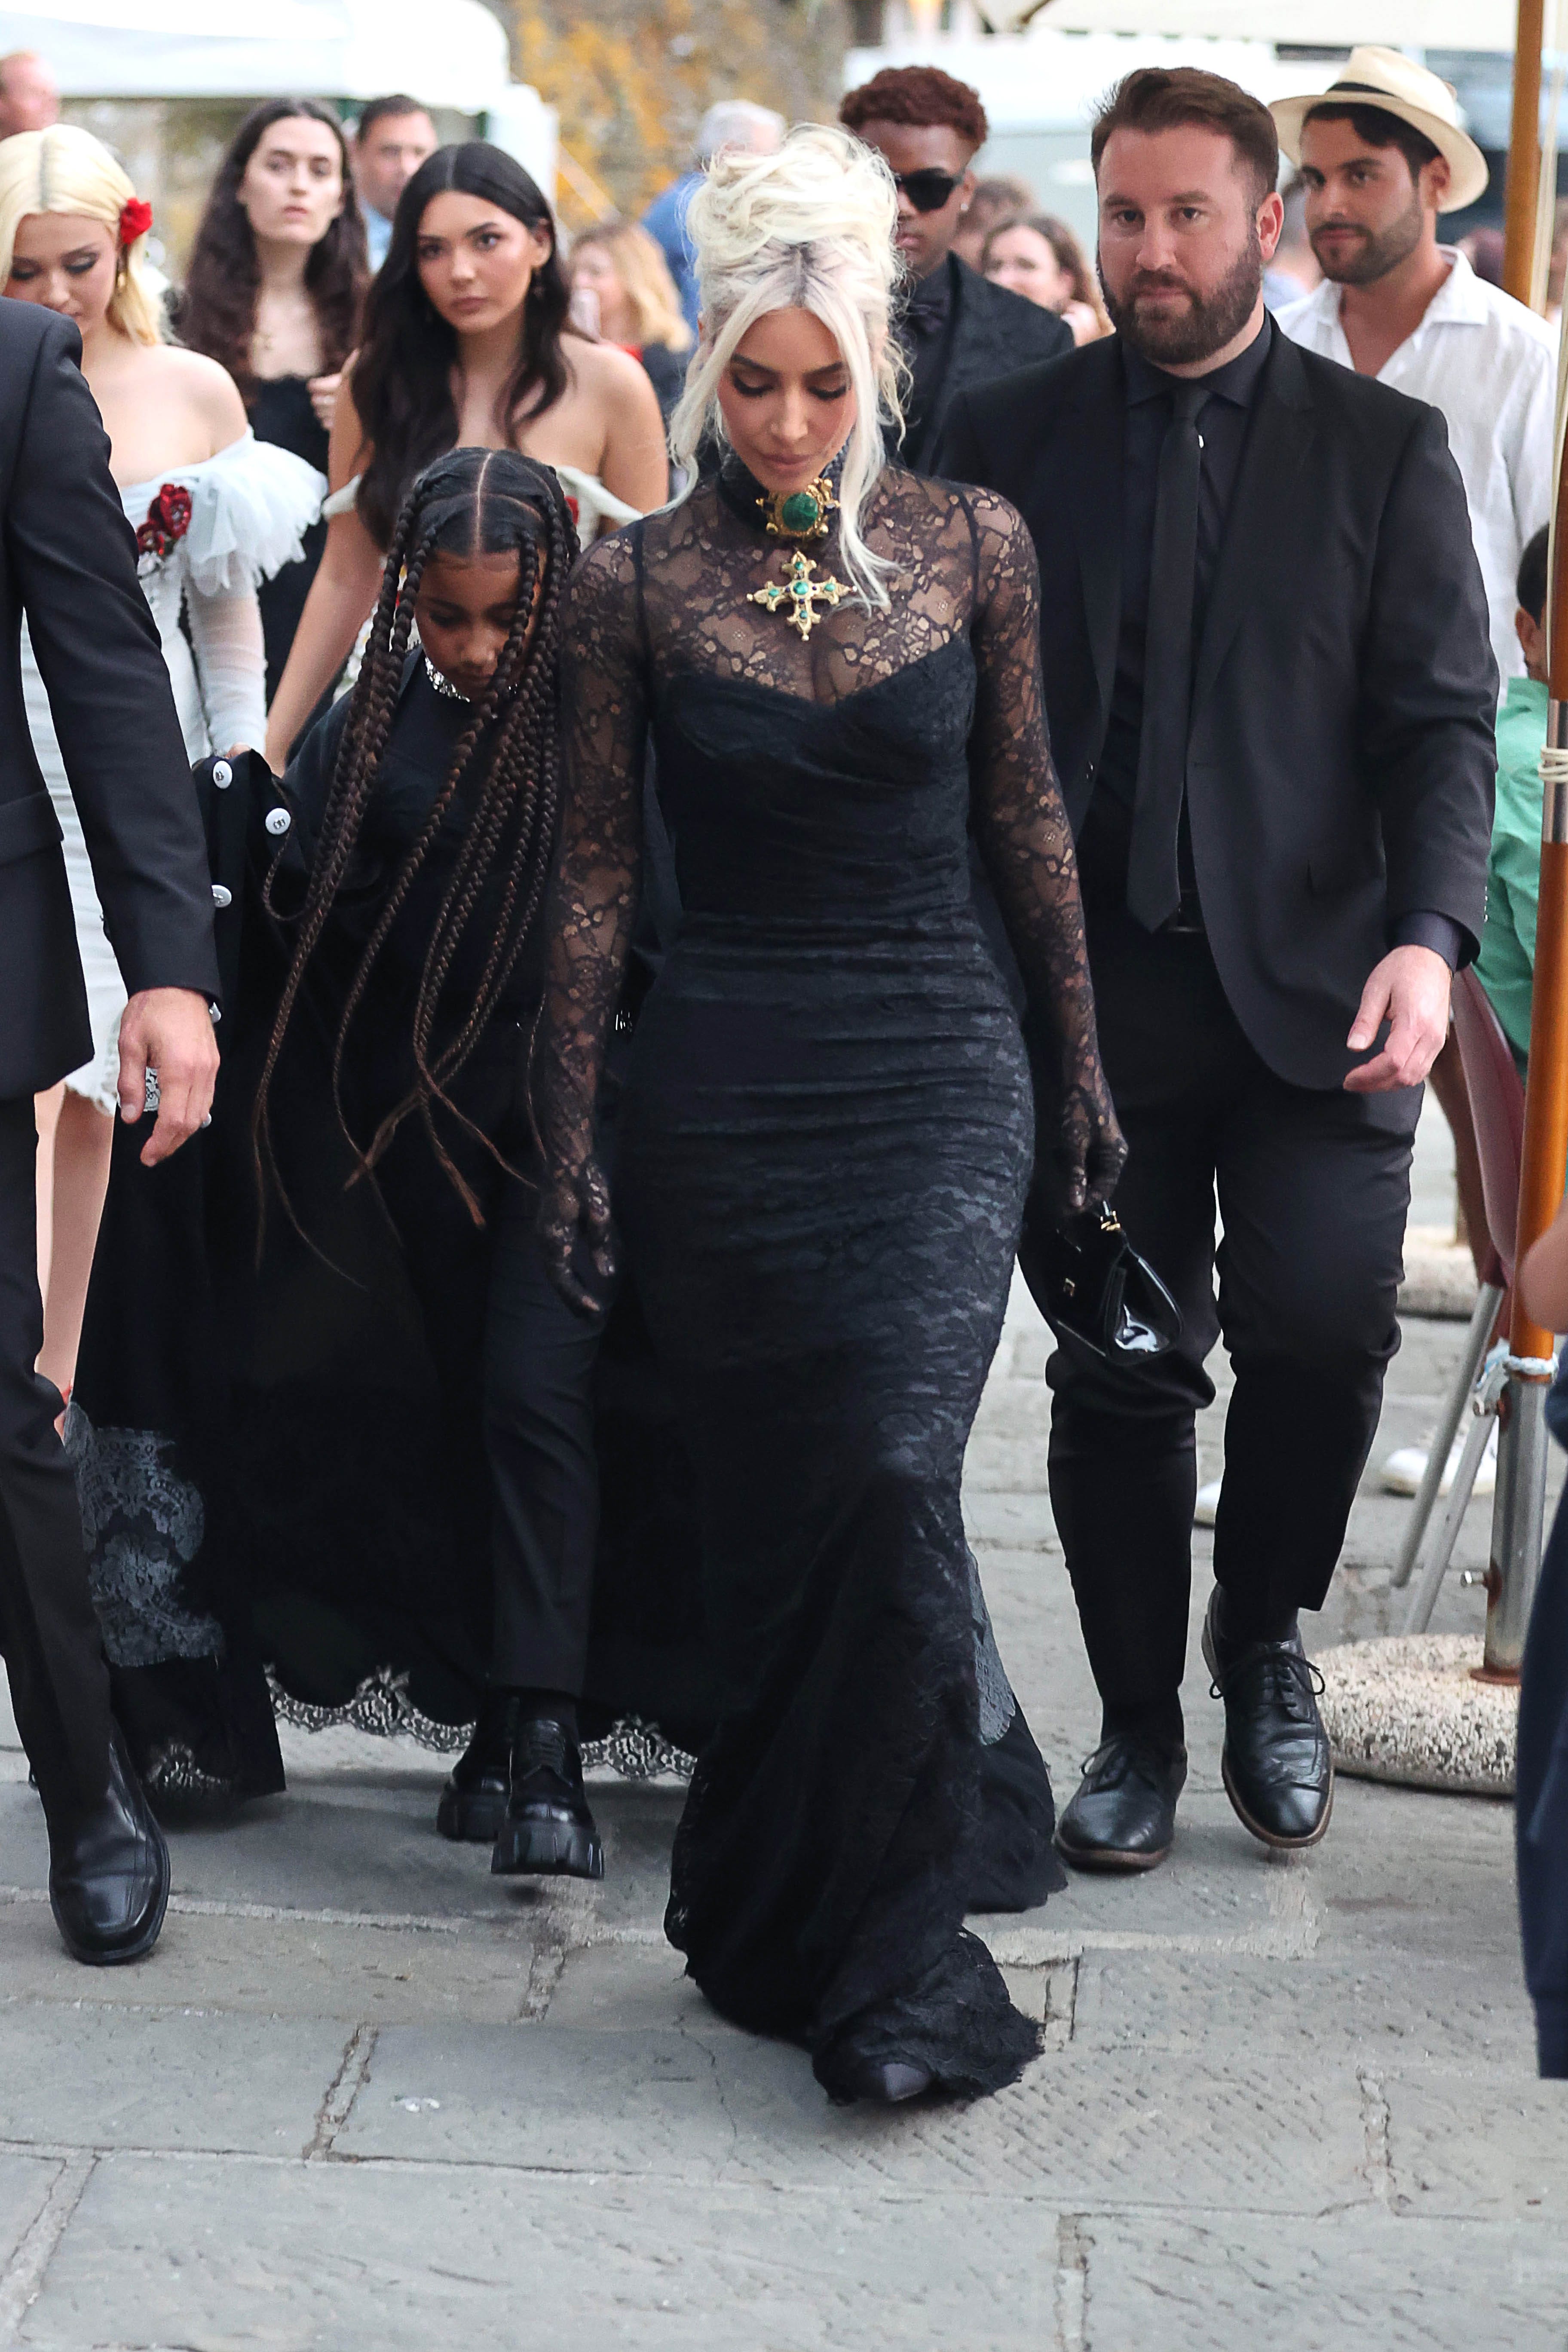 Kim Kardashian spotted in revealing dress at convenience store after Paris  Hilton's wedding